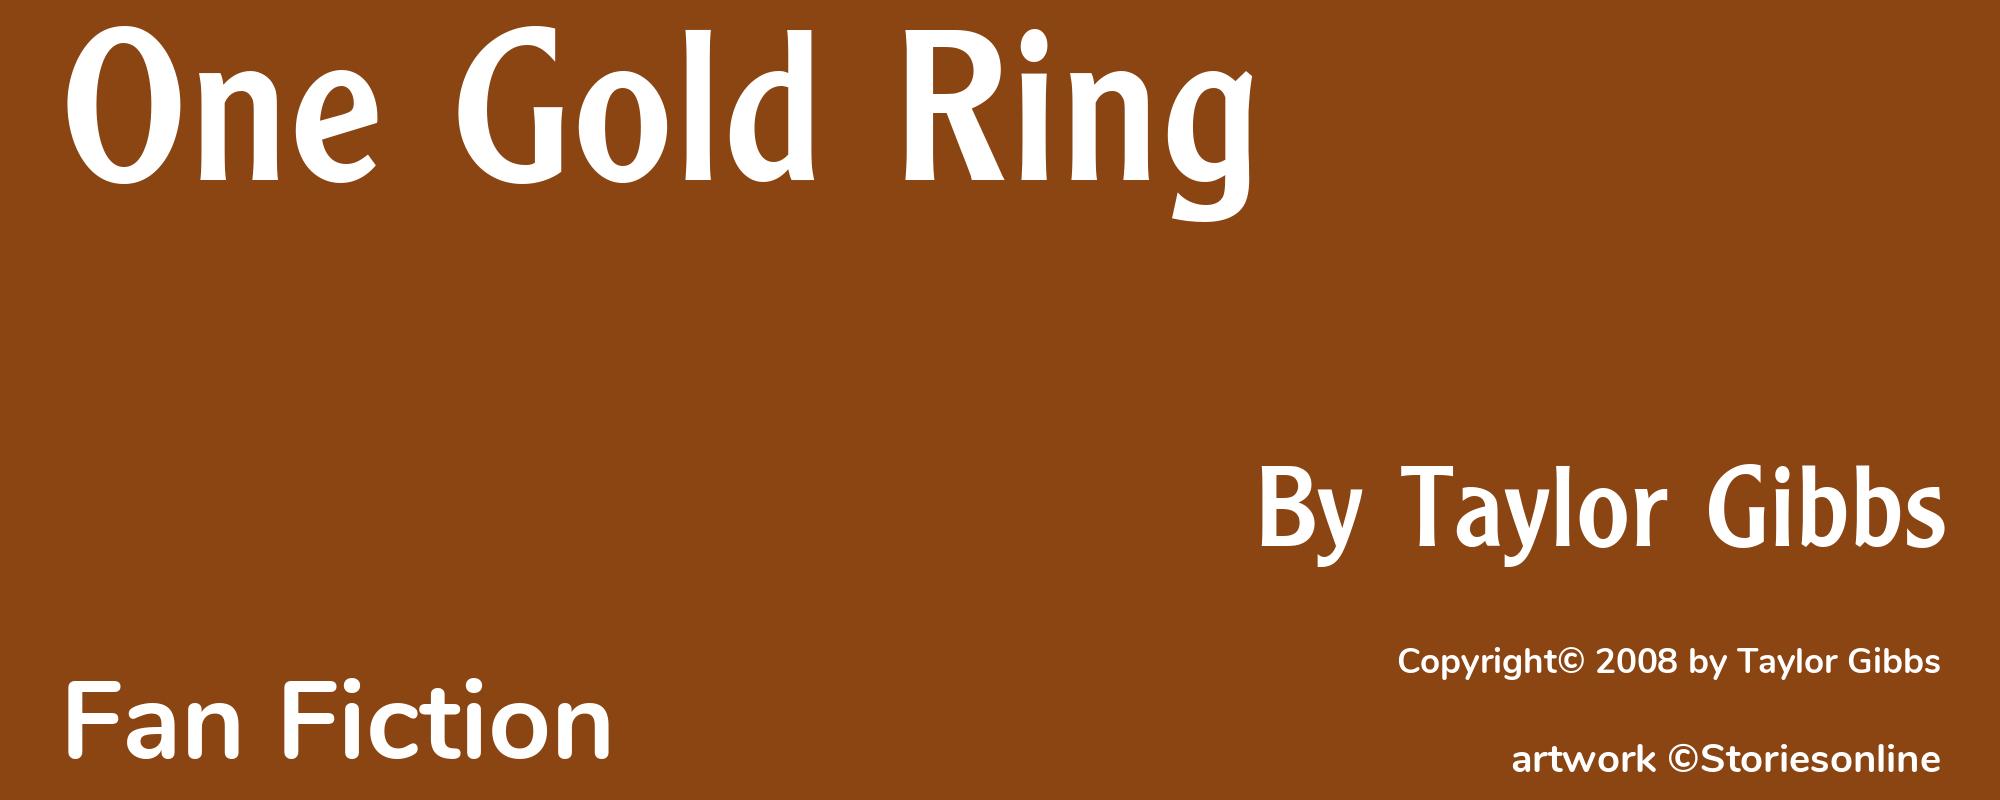 One Gold Ring - Cover